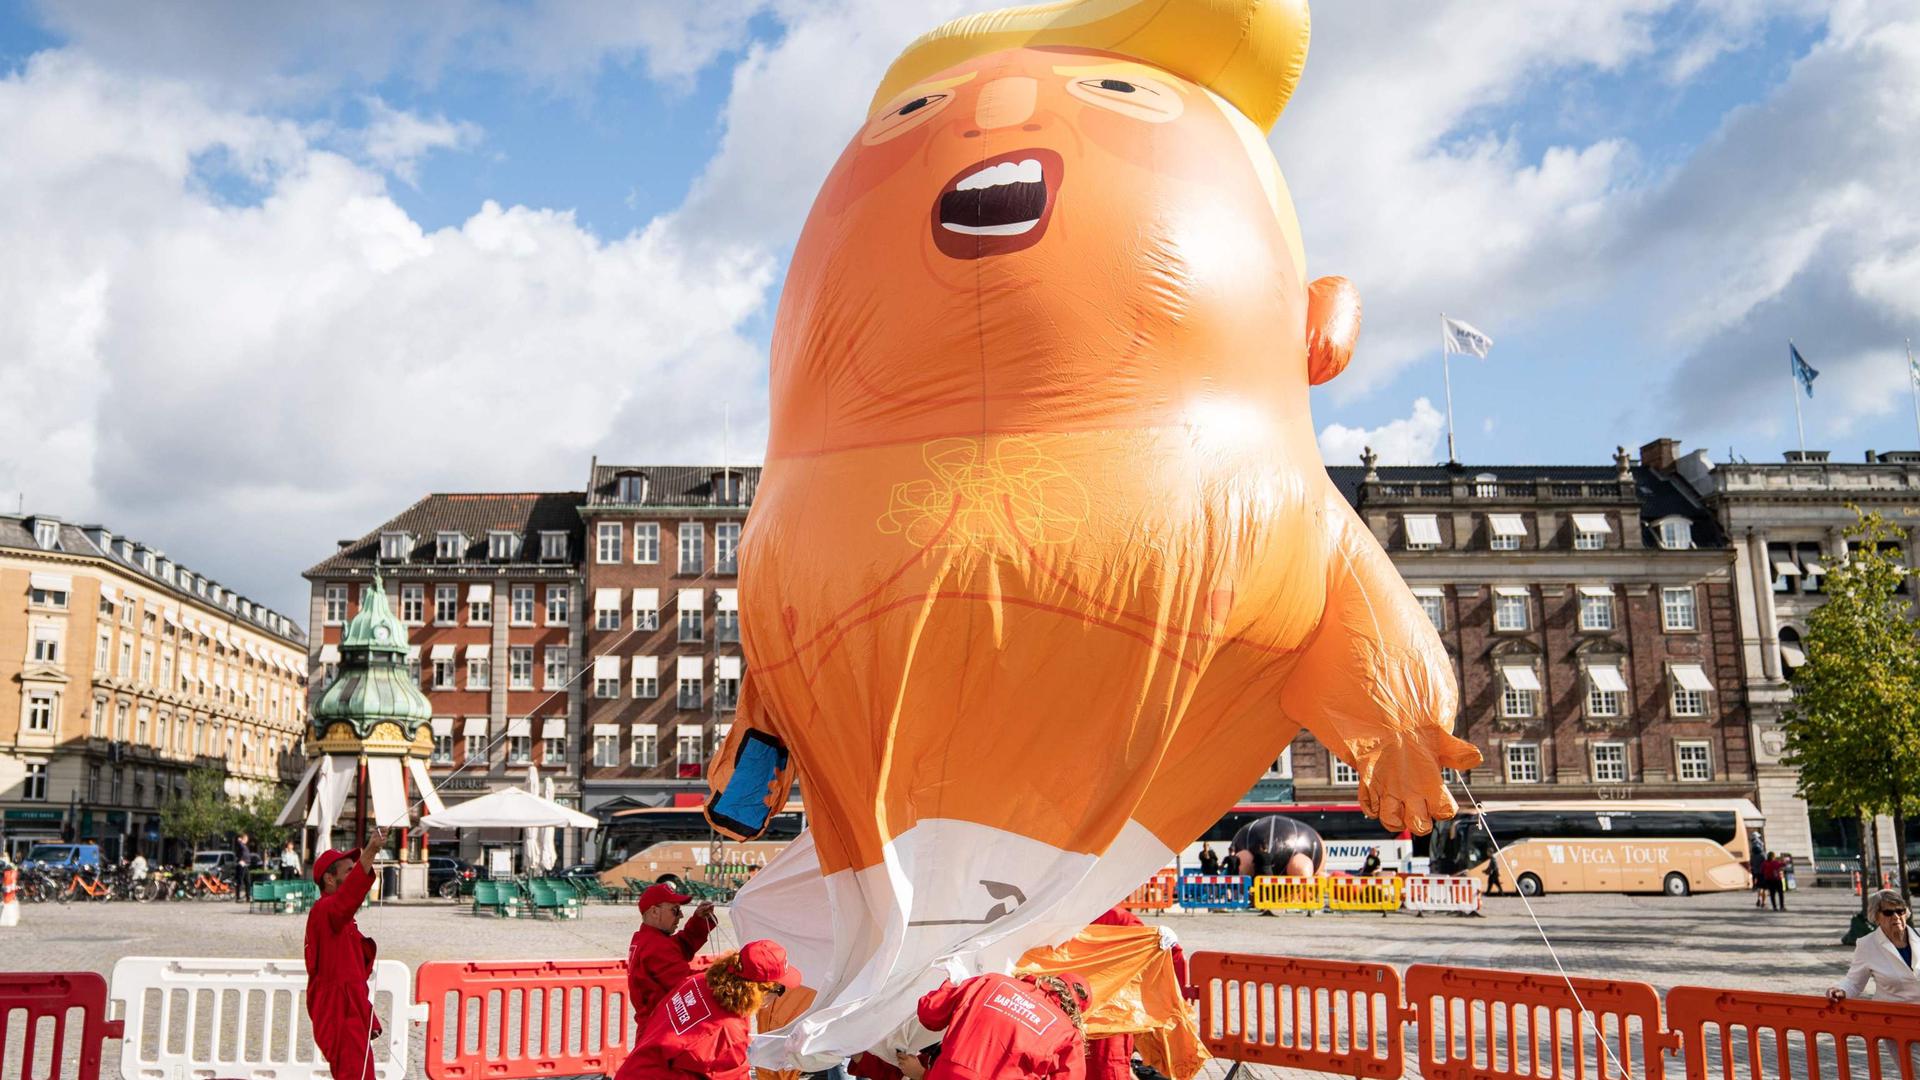 Demonstrators protest with an inflated Baby-Trump balloon at Kongens Nytorv in Copenhagen, Denmark, on September 2, 2019. - Though US President Donald Trump had canceled the state visit to Denmark scheduled for September 2 and 3, 2019, demonstrators carried out their planned protests. (Photo by Niels Christian Vilmann / Ritzau Scanpix / AFP) / Denmark OUT